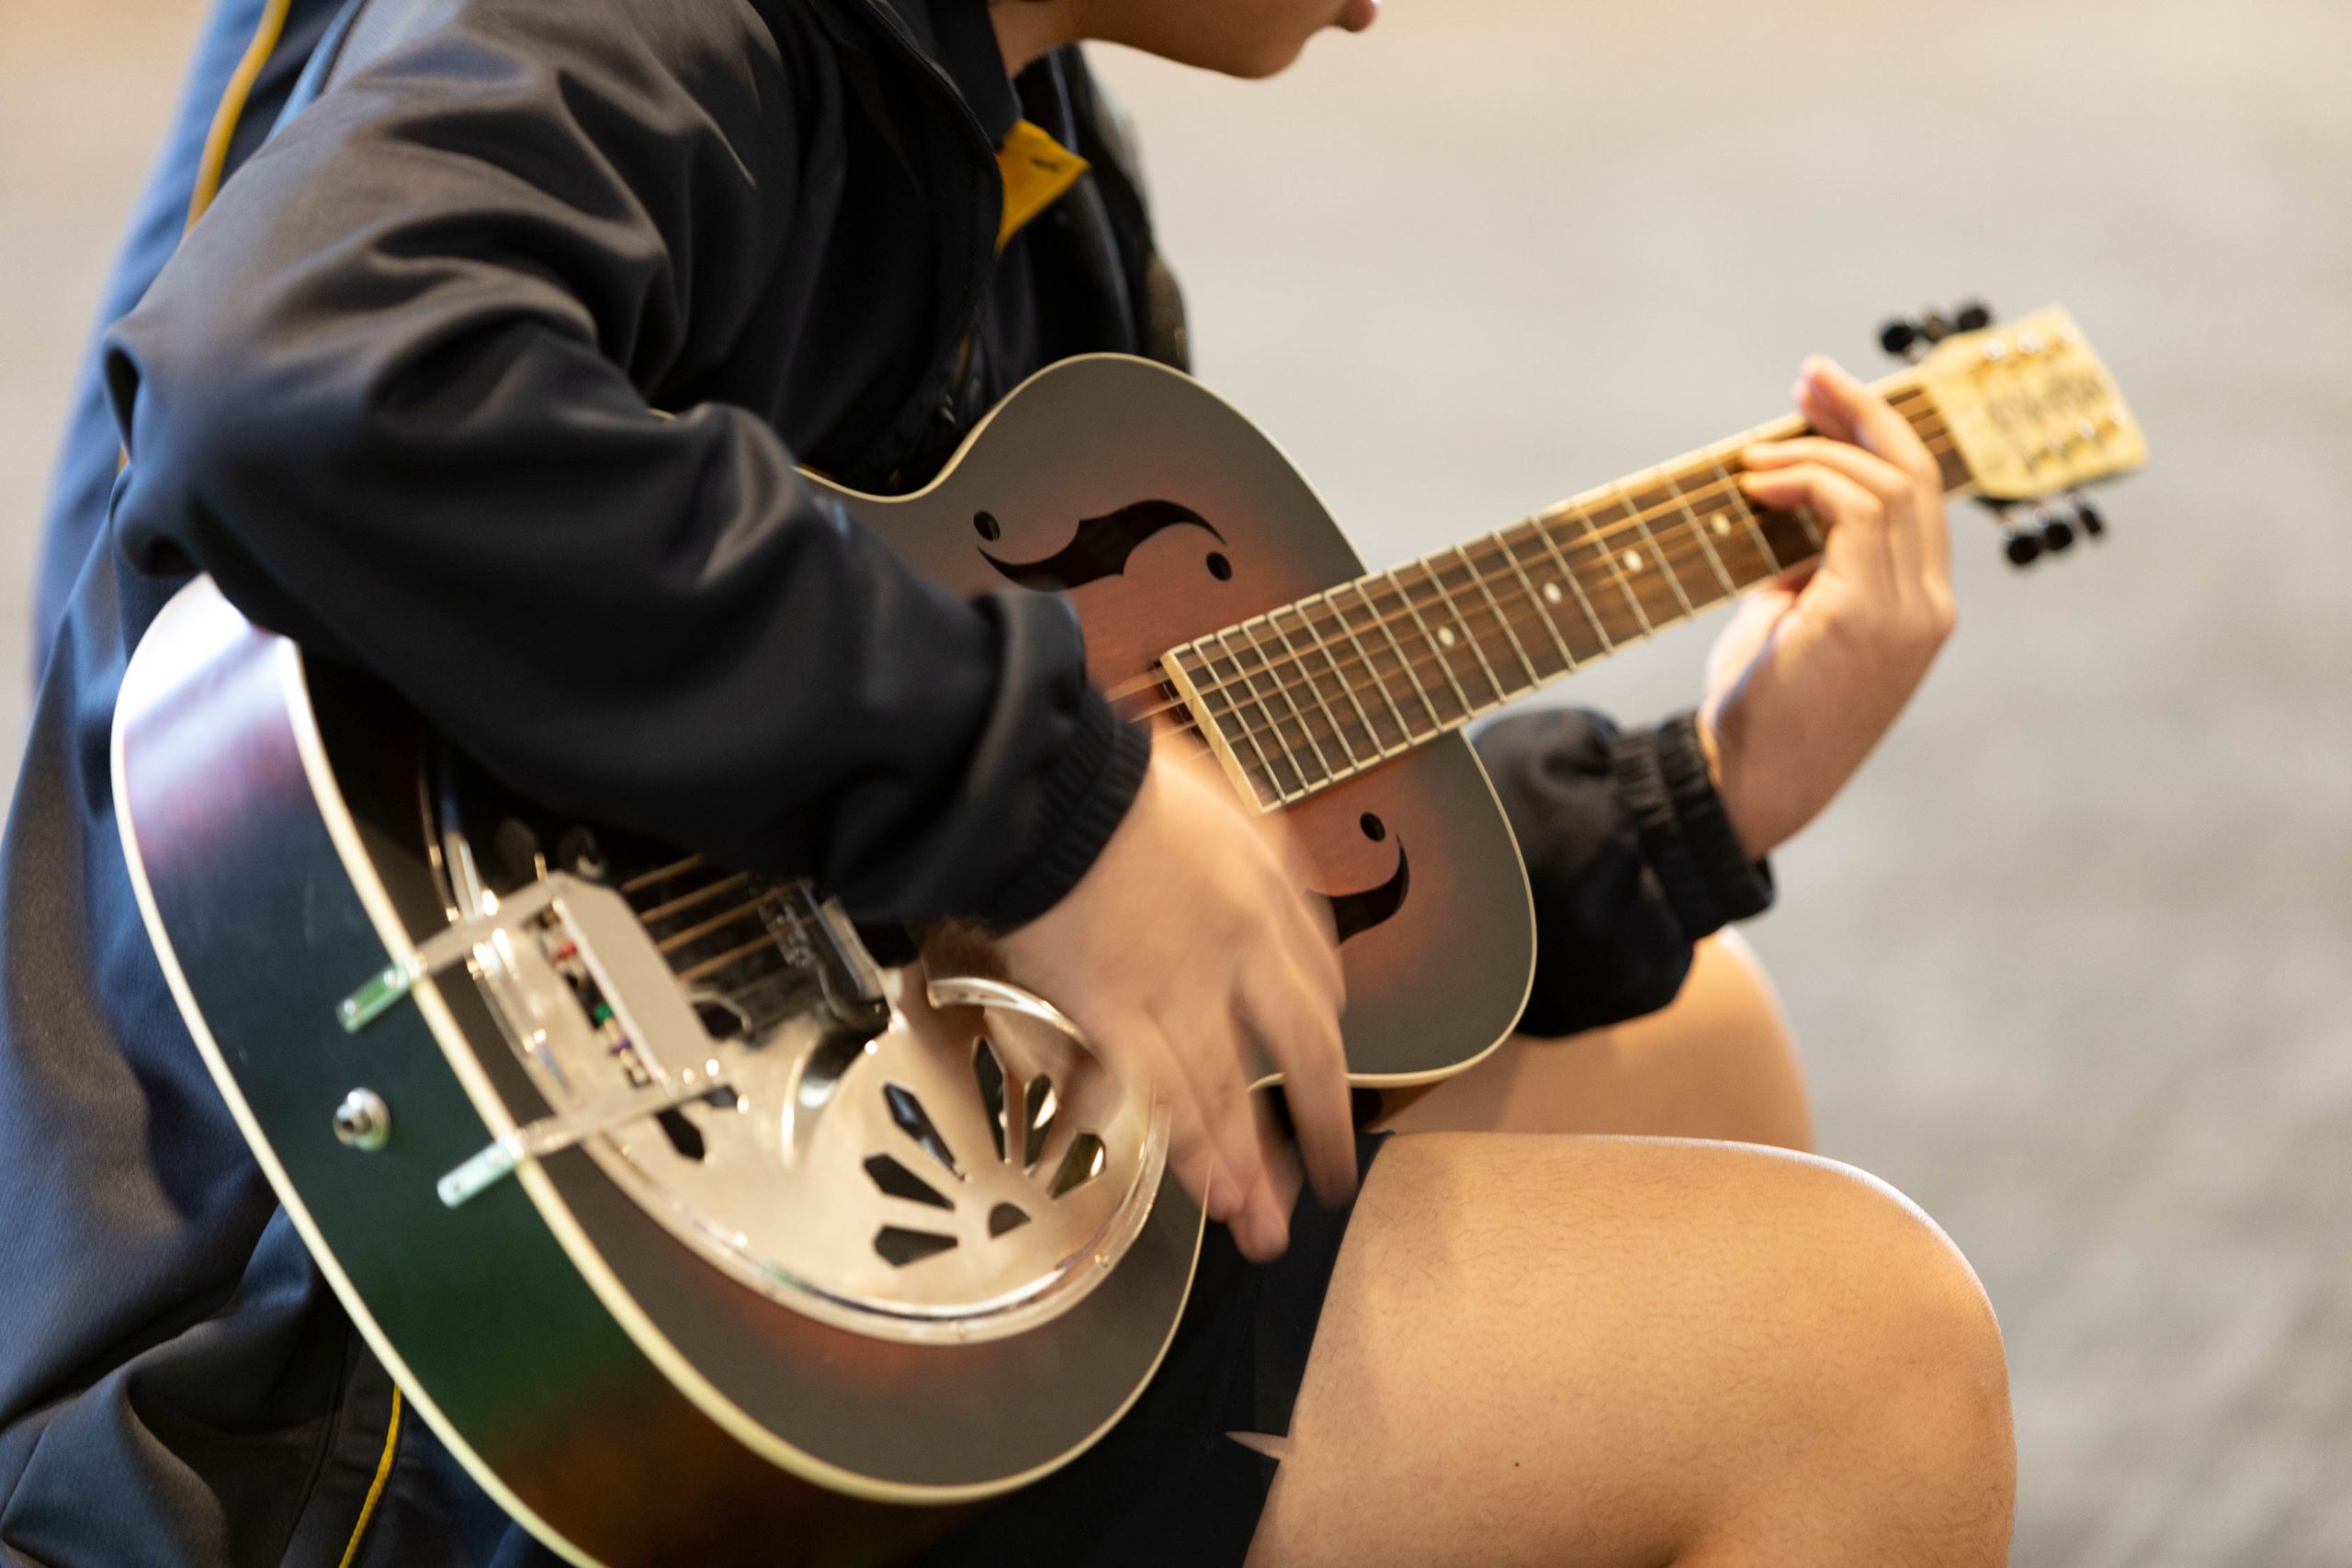 Student playing a guitar